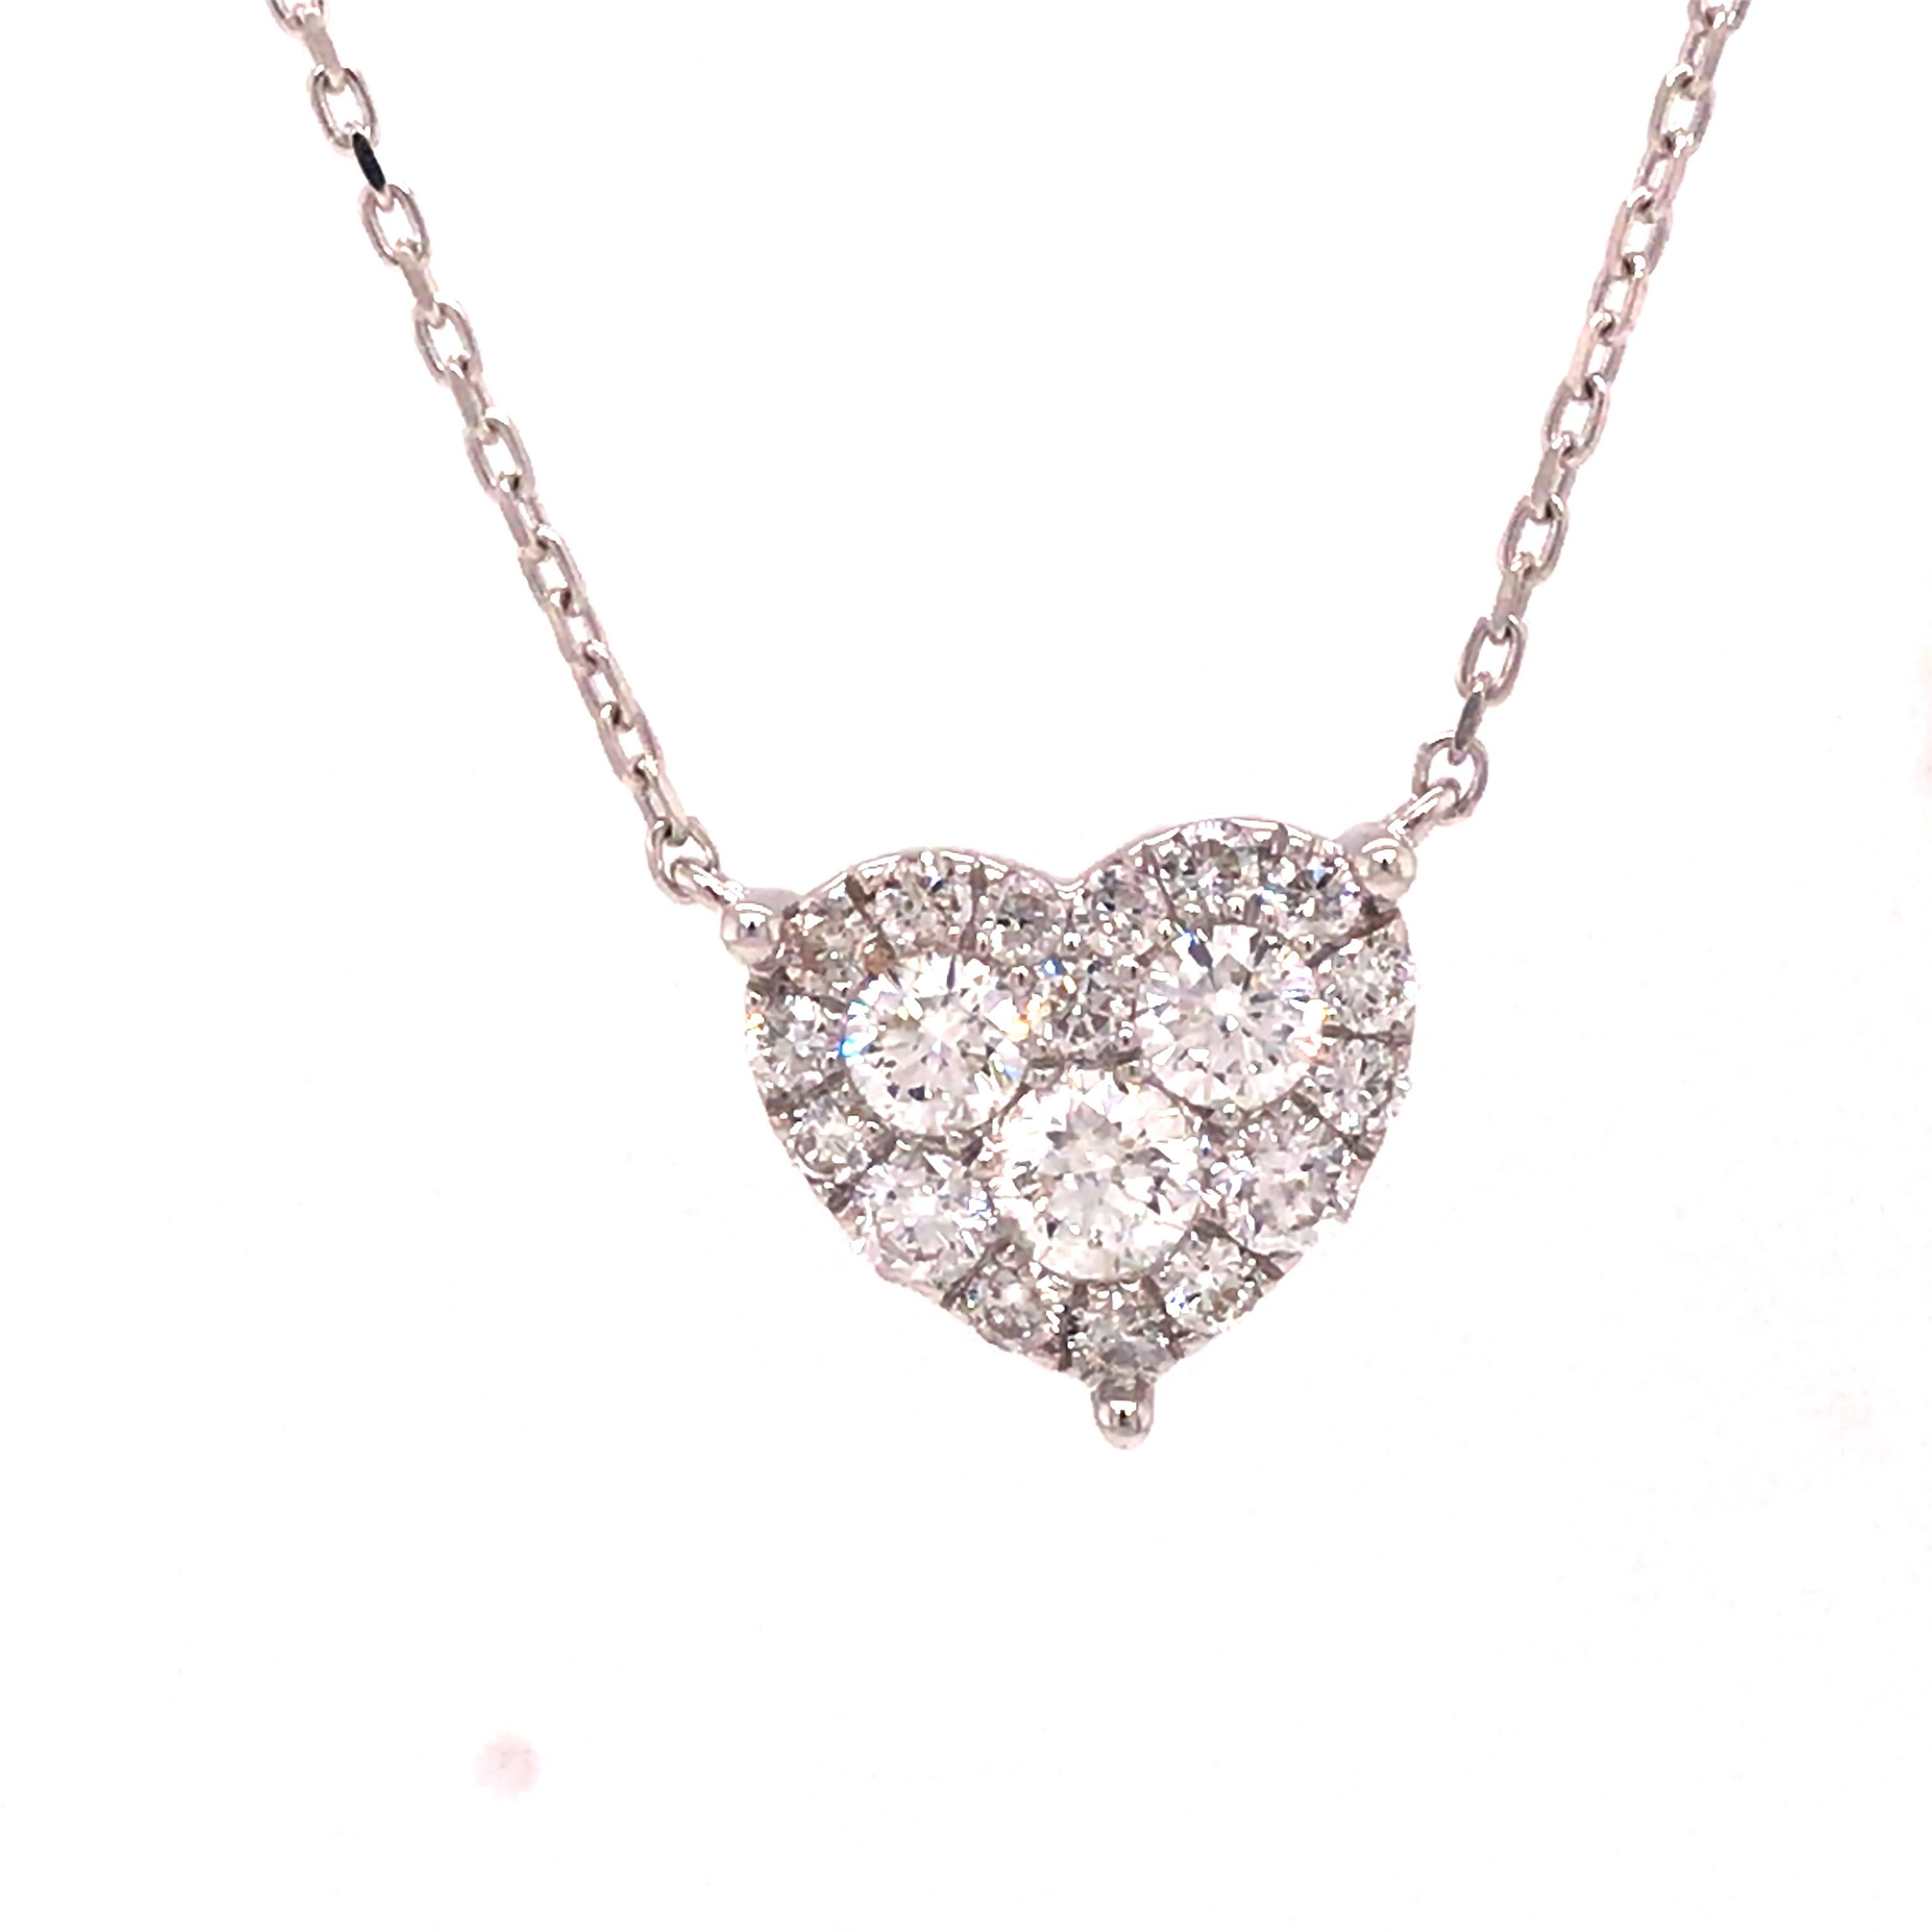 Diamond Pave Heart Necklace in 18K White Gold.  (19) Round Brilliant Cut Diamonds weighing 0.66 carat total weight, G-H in color and VS-SI in clarity are expertly set.  The Necklace measures 16 inch in length. 2.81 grams.